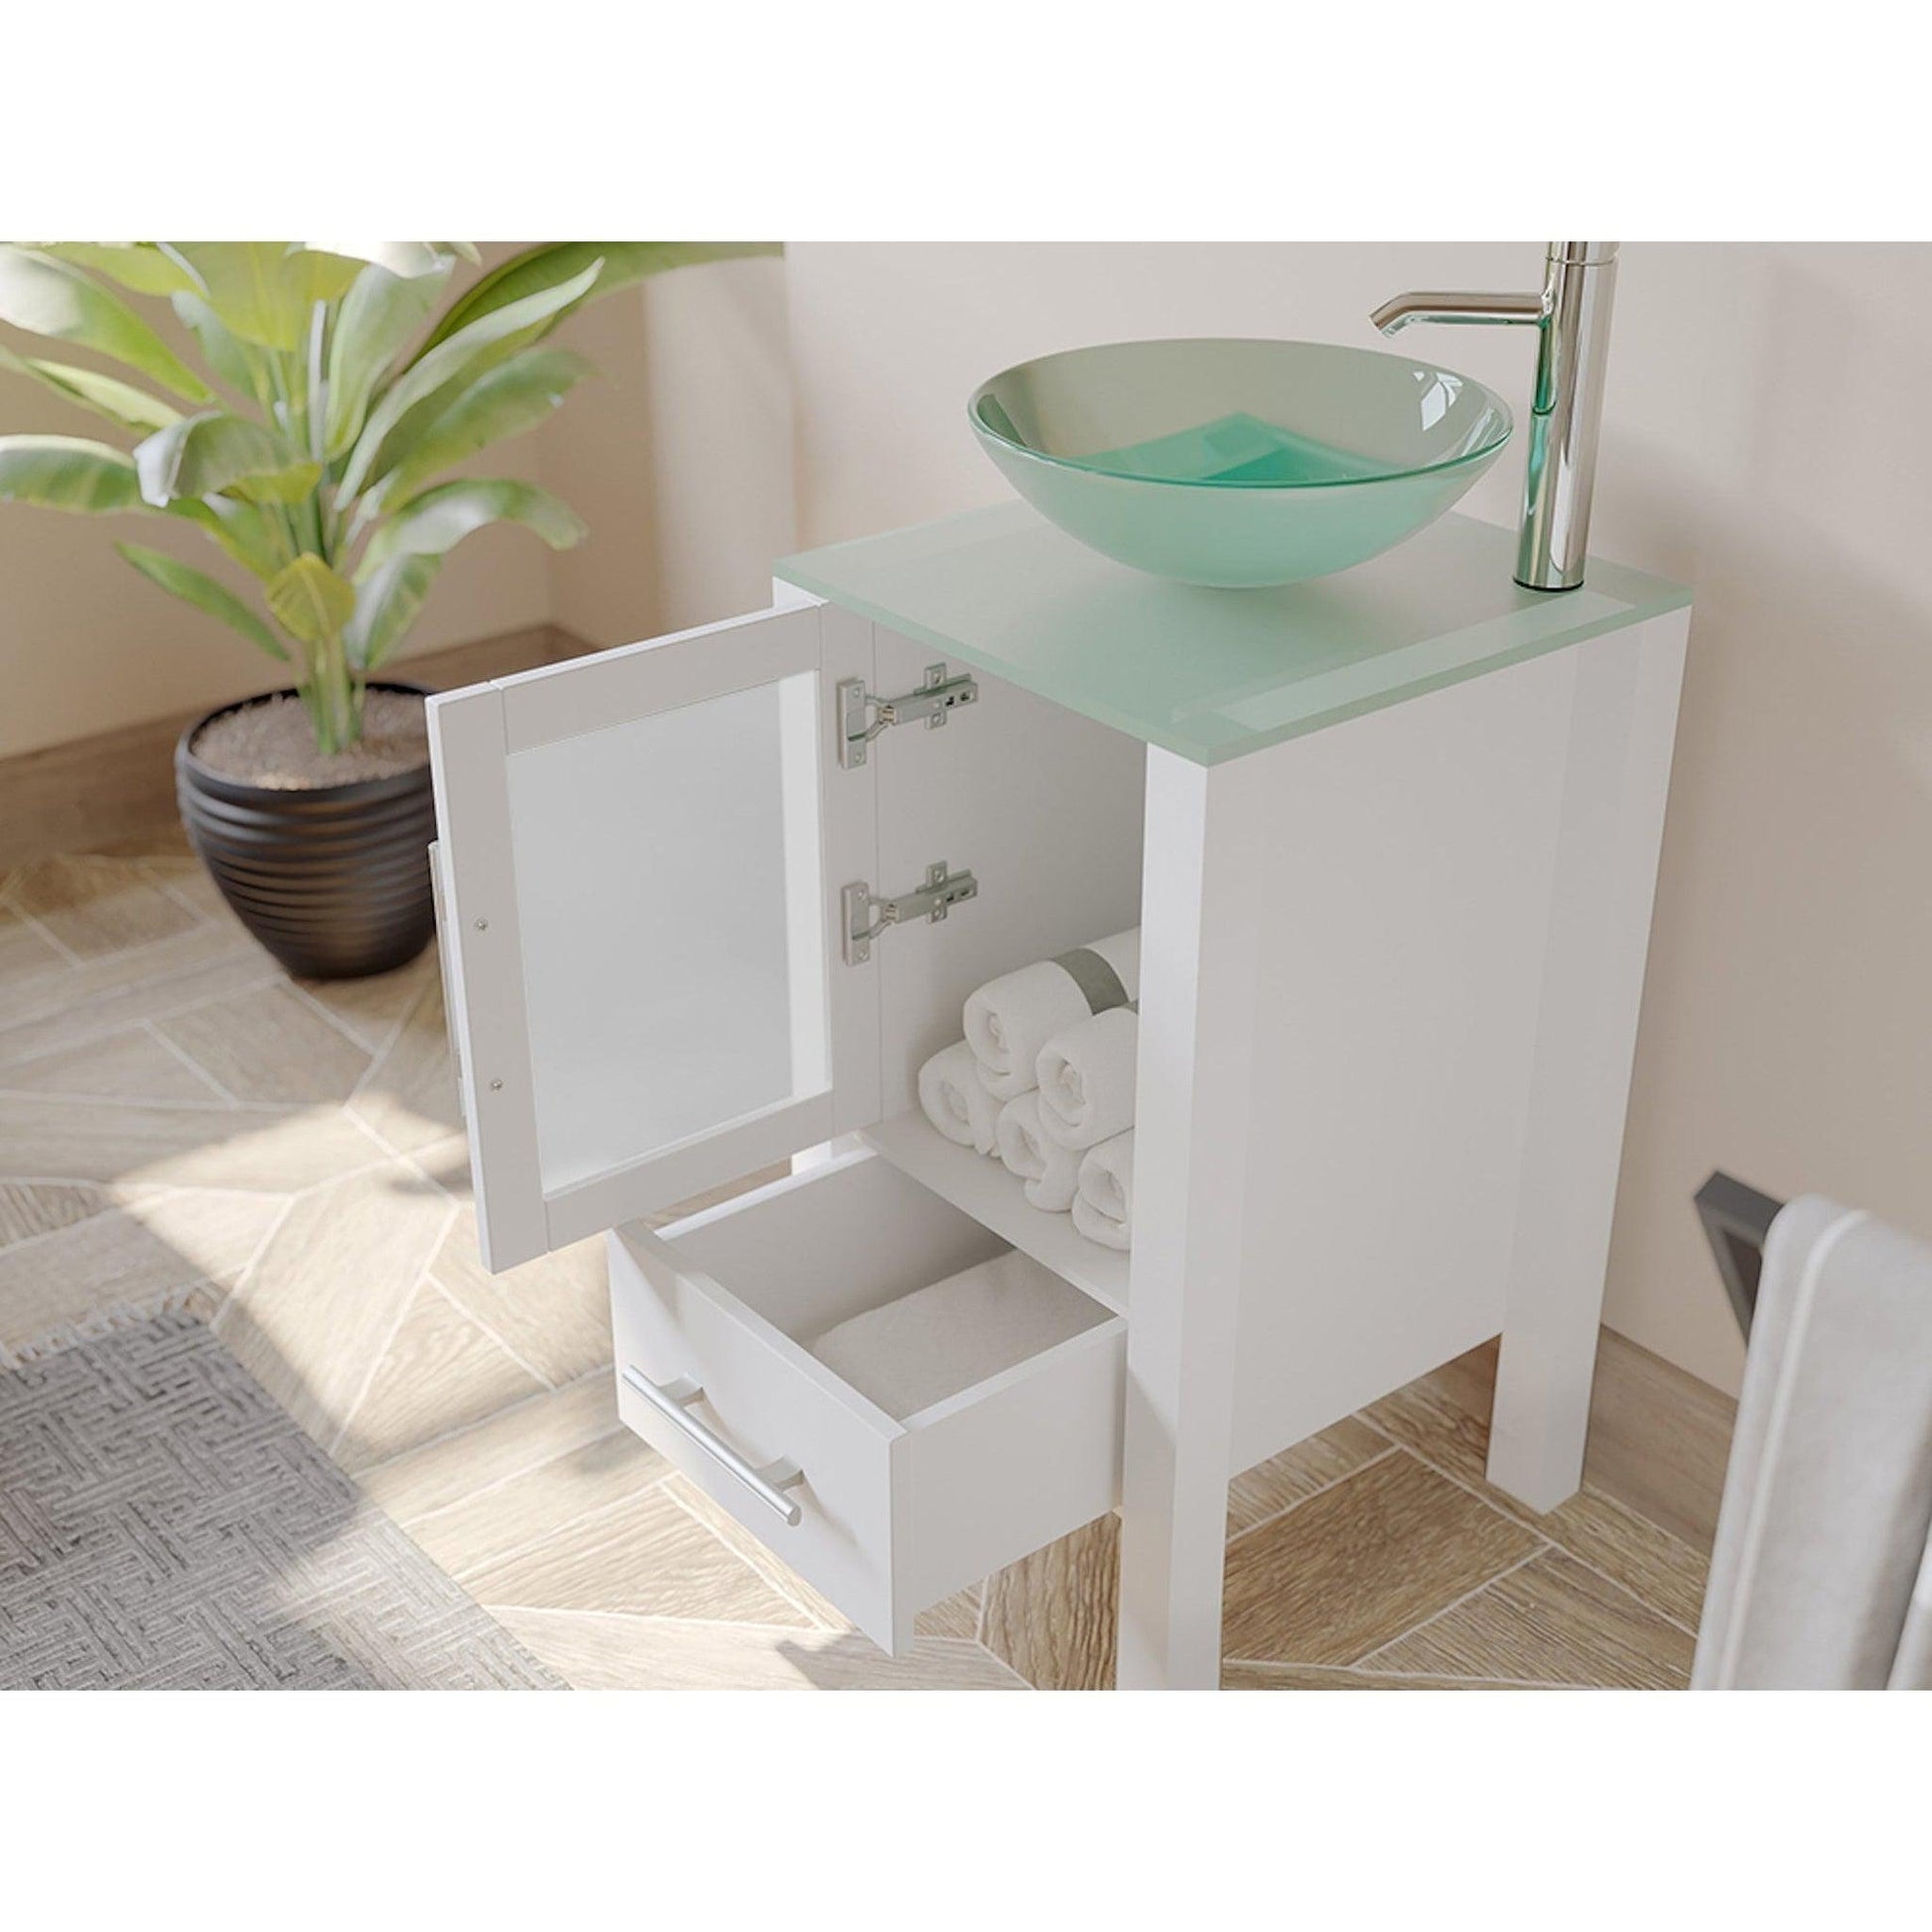 Cambridge Plumbing 18" White Single Wood Vanity Set With Tempered Glass Countertop And Circular Vessel Sink With Polished Chrome Plumbing Finish